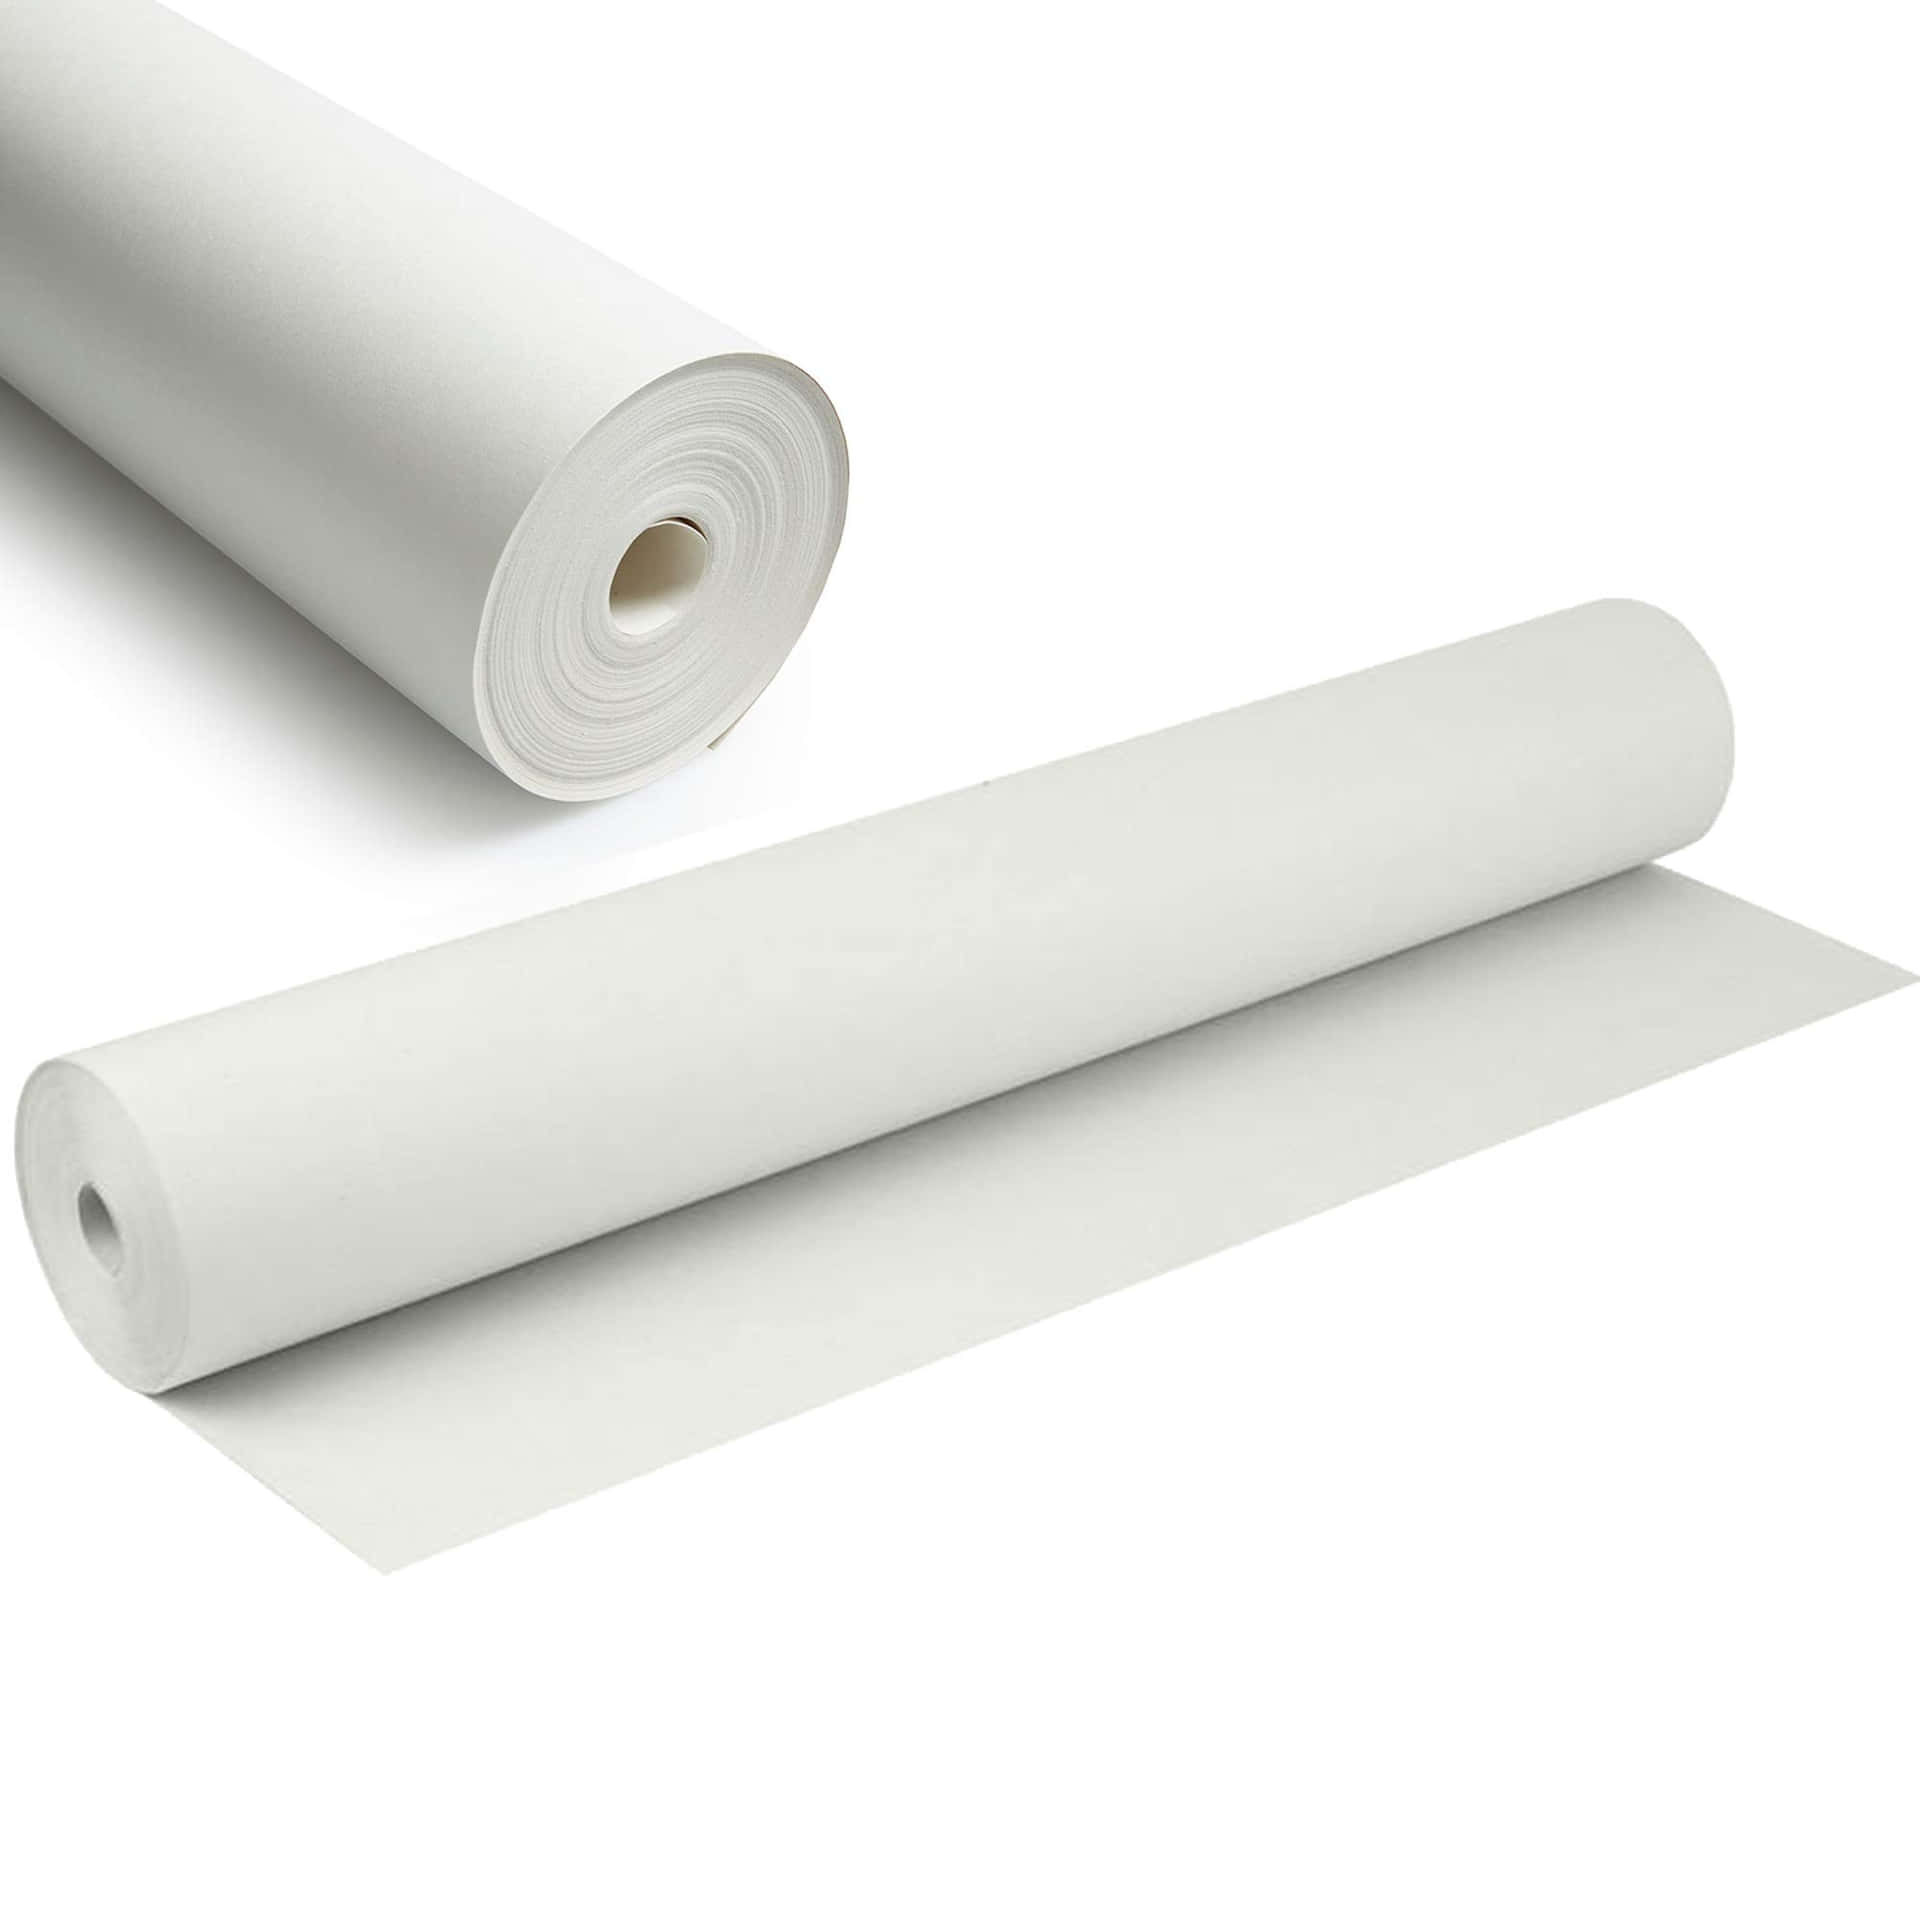 Two Plain White Paper Rolls Background